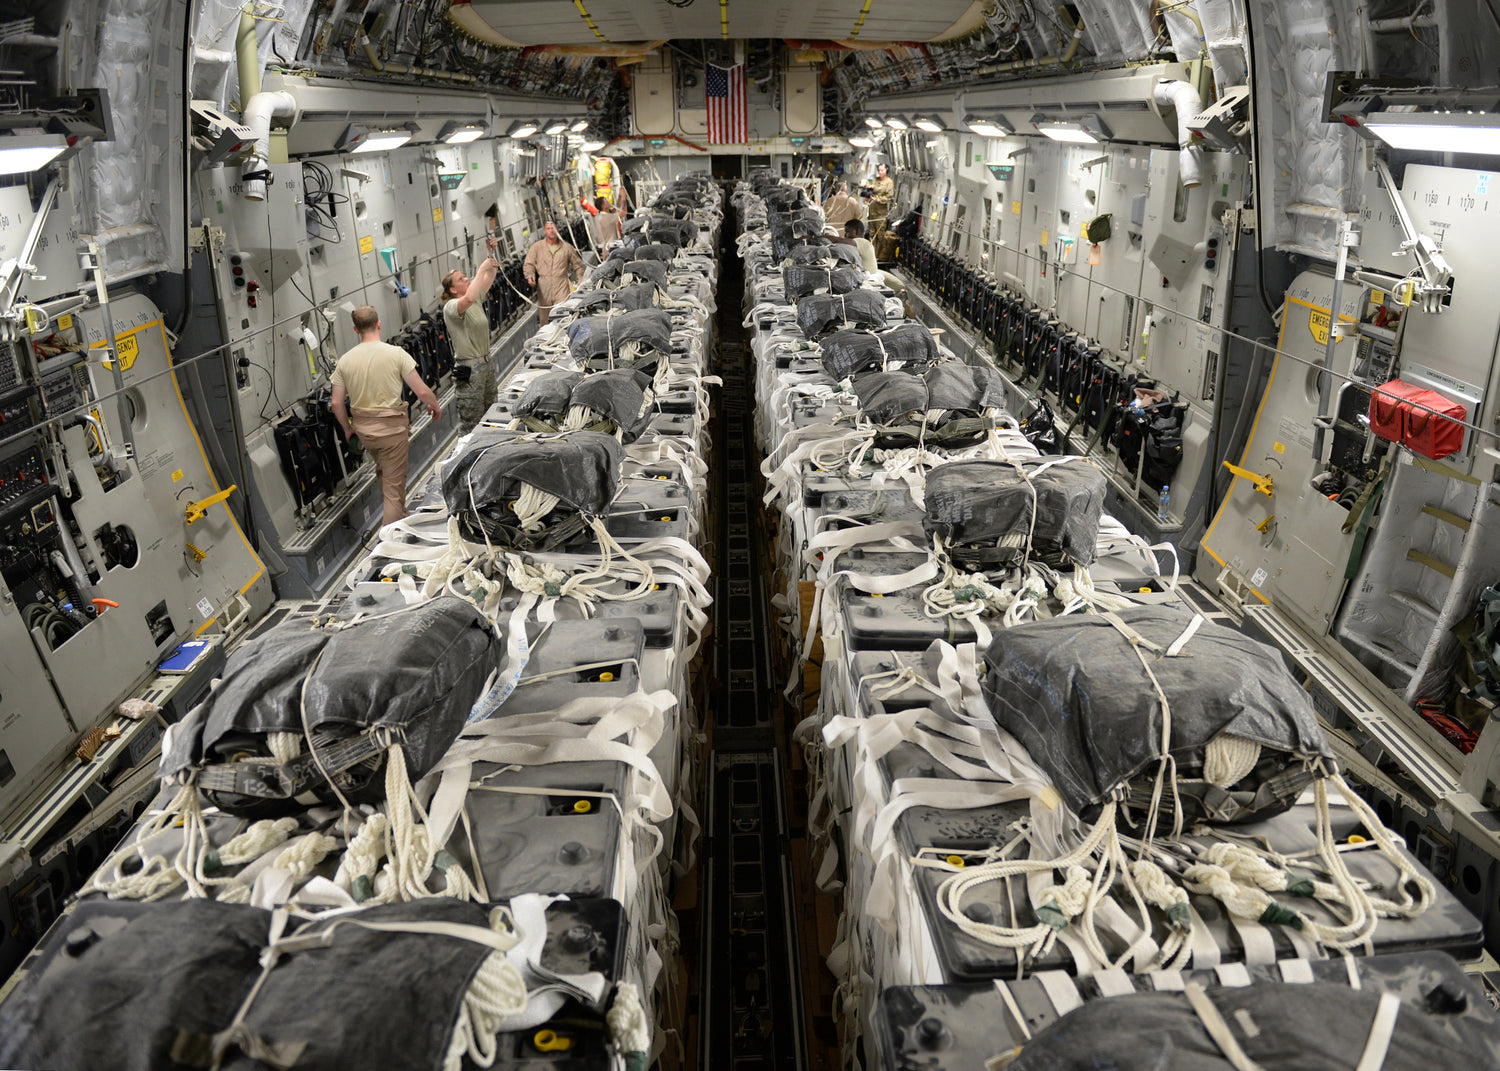 High velocity cargo parachutes have been rigged inside the plane for humanitarian aid to be dropped in Syria.